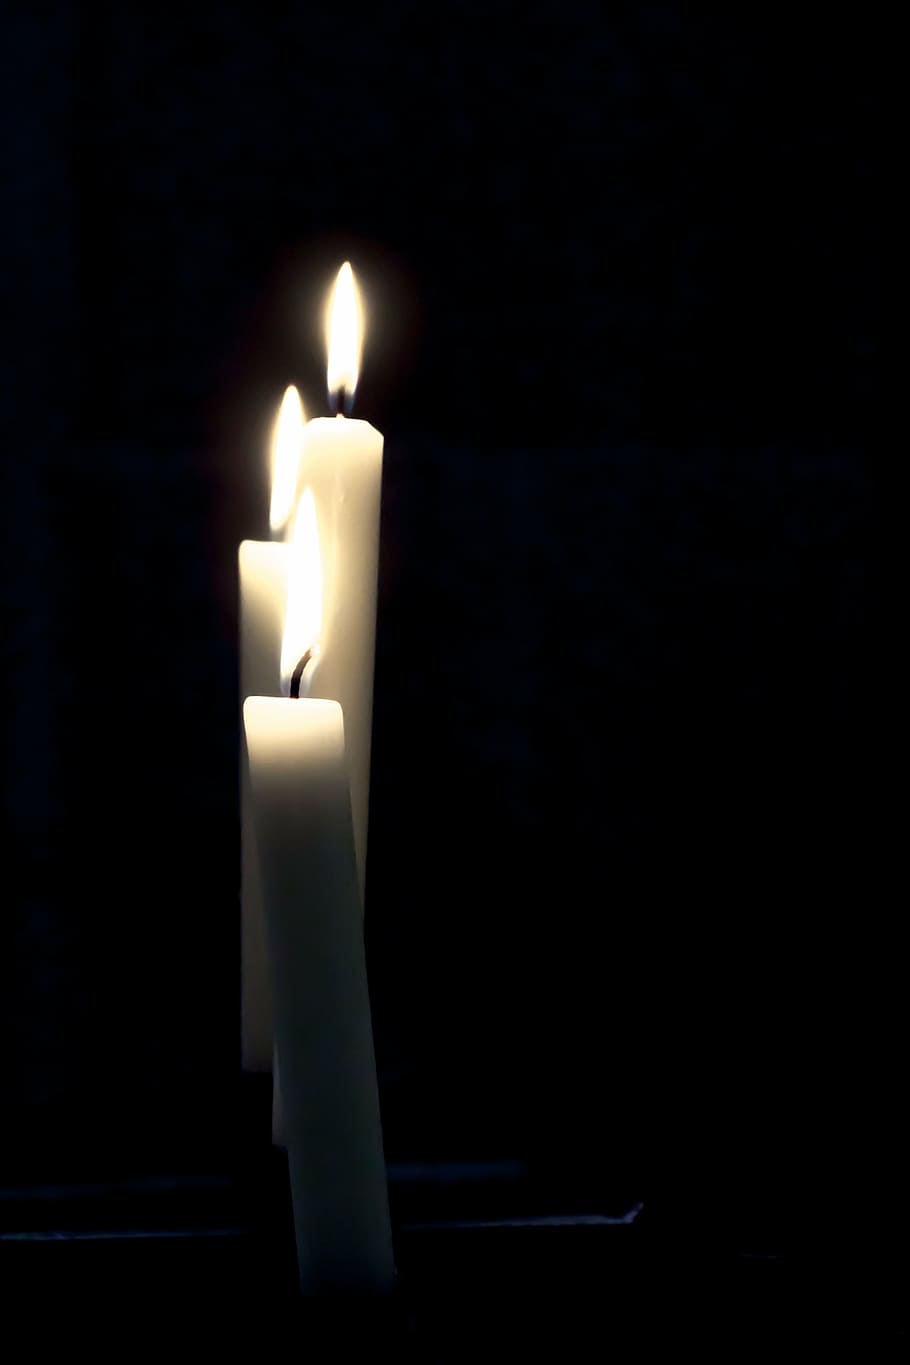 three, lighted, white, taper, candles, mourning, candlelight, memory, commemorate, death